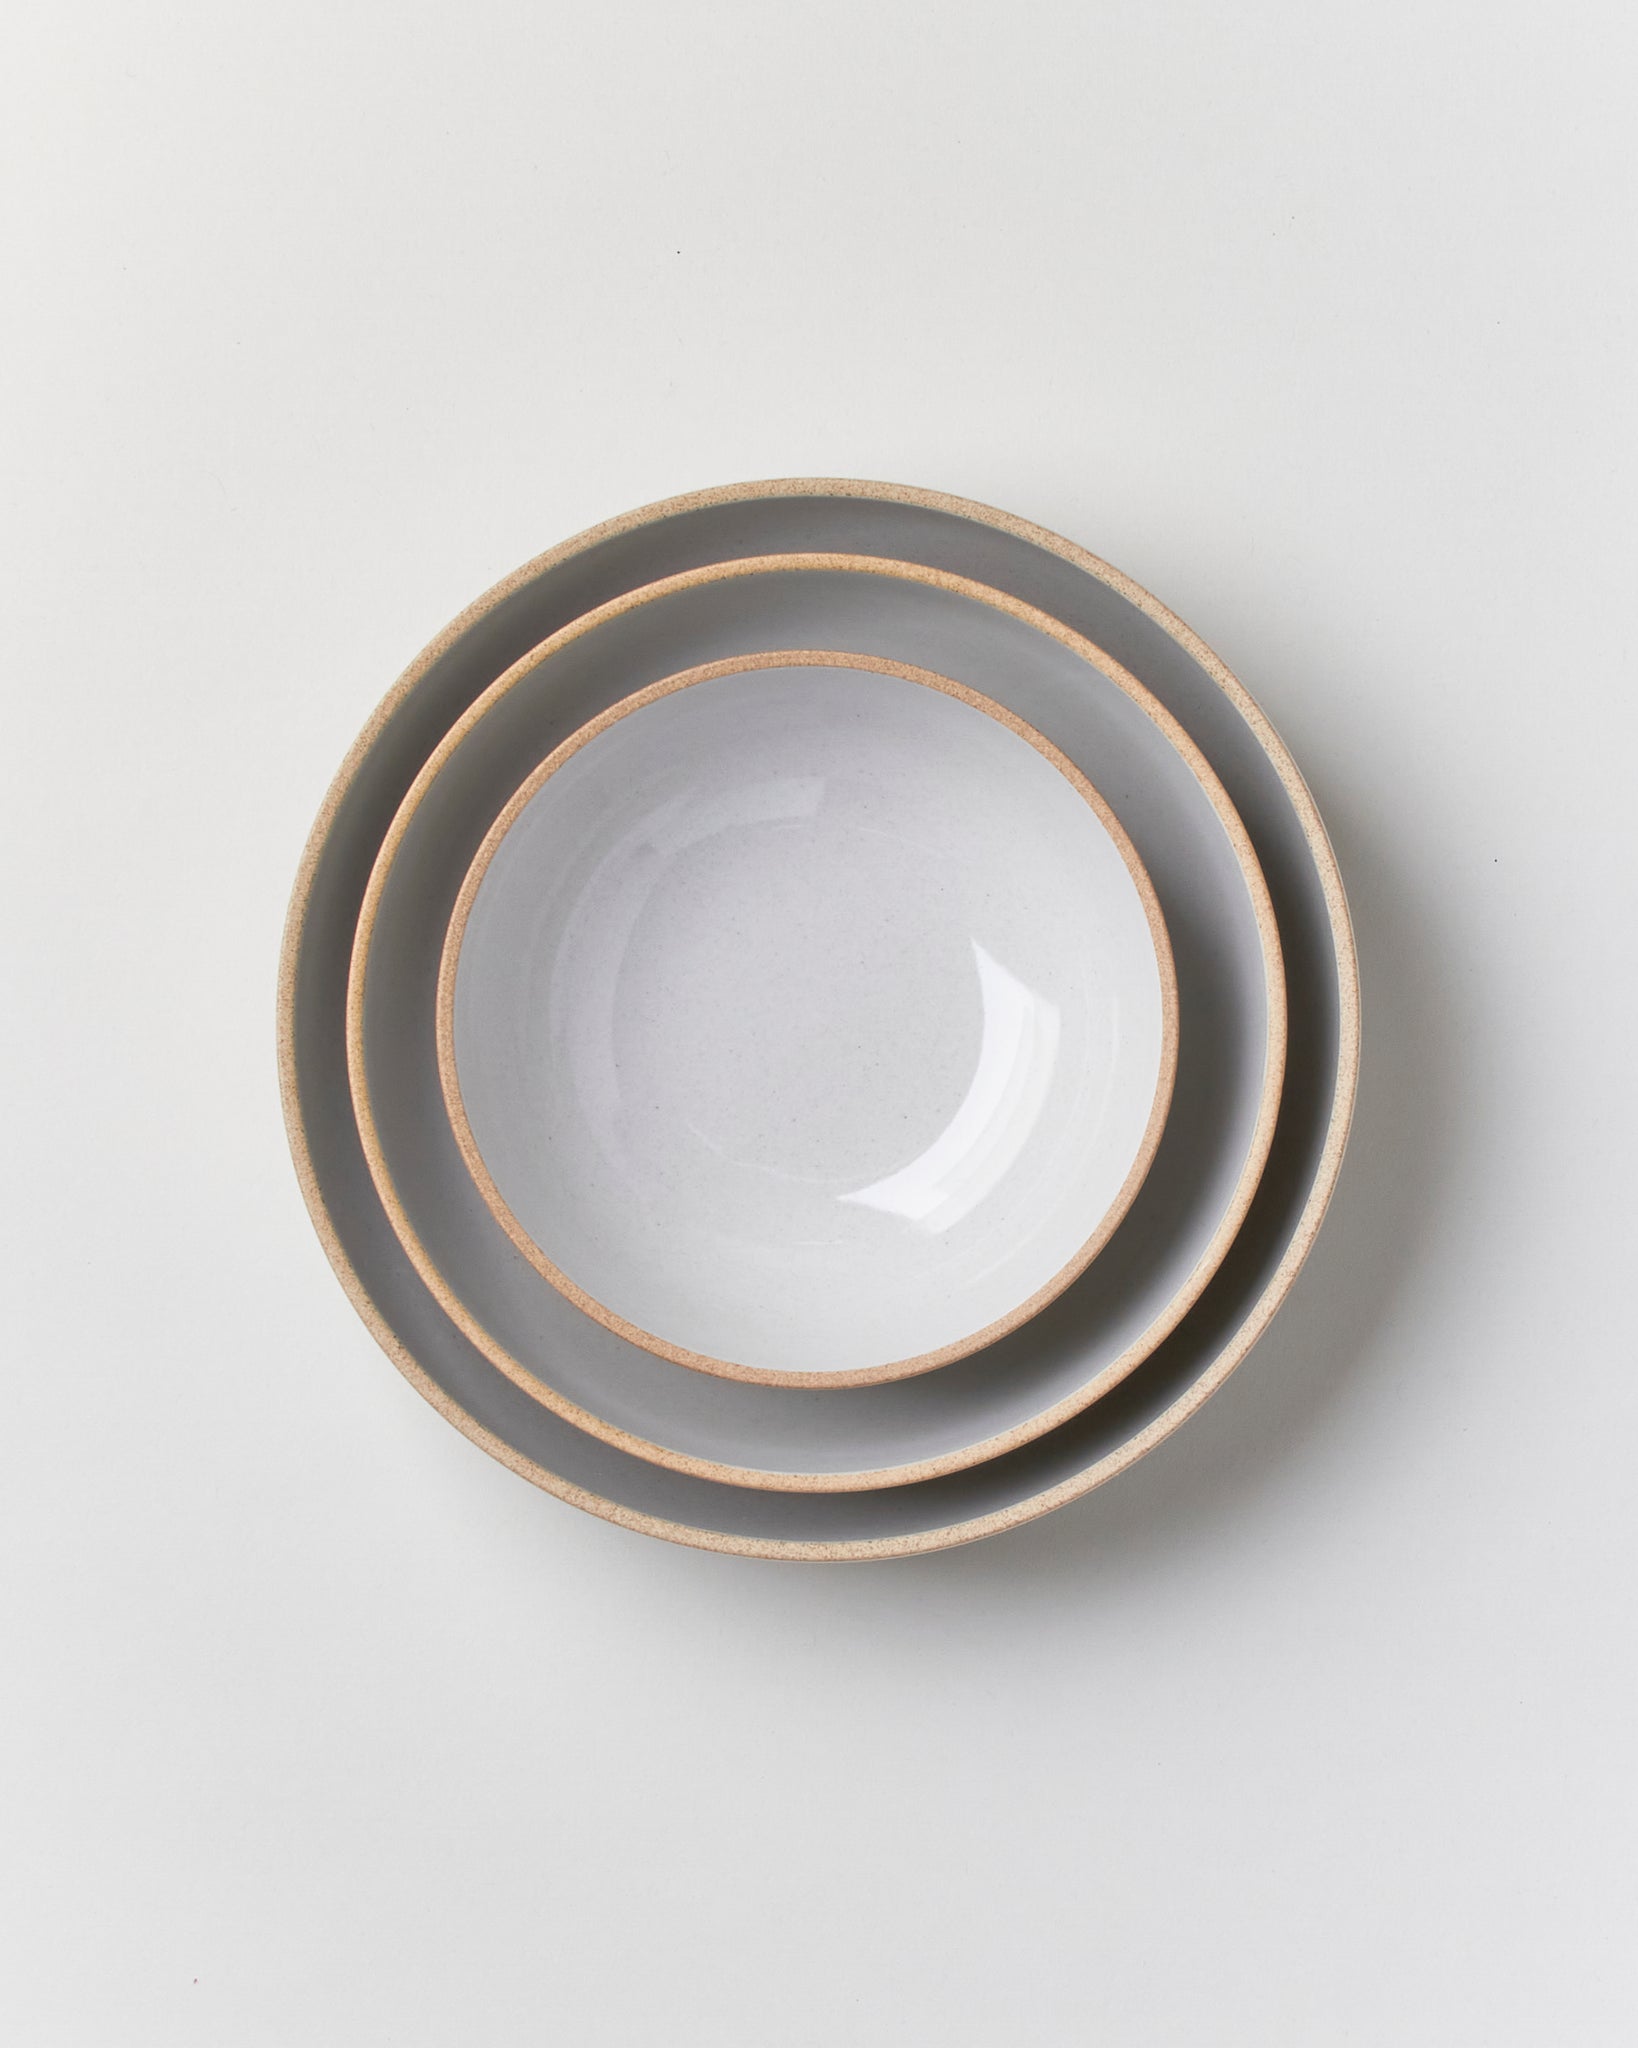 Hasami 5 5/8-inch Round Bowl in Gloss Grey